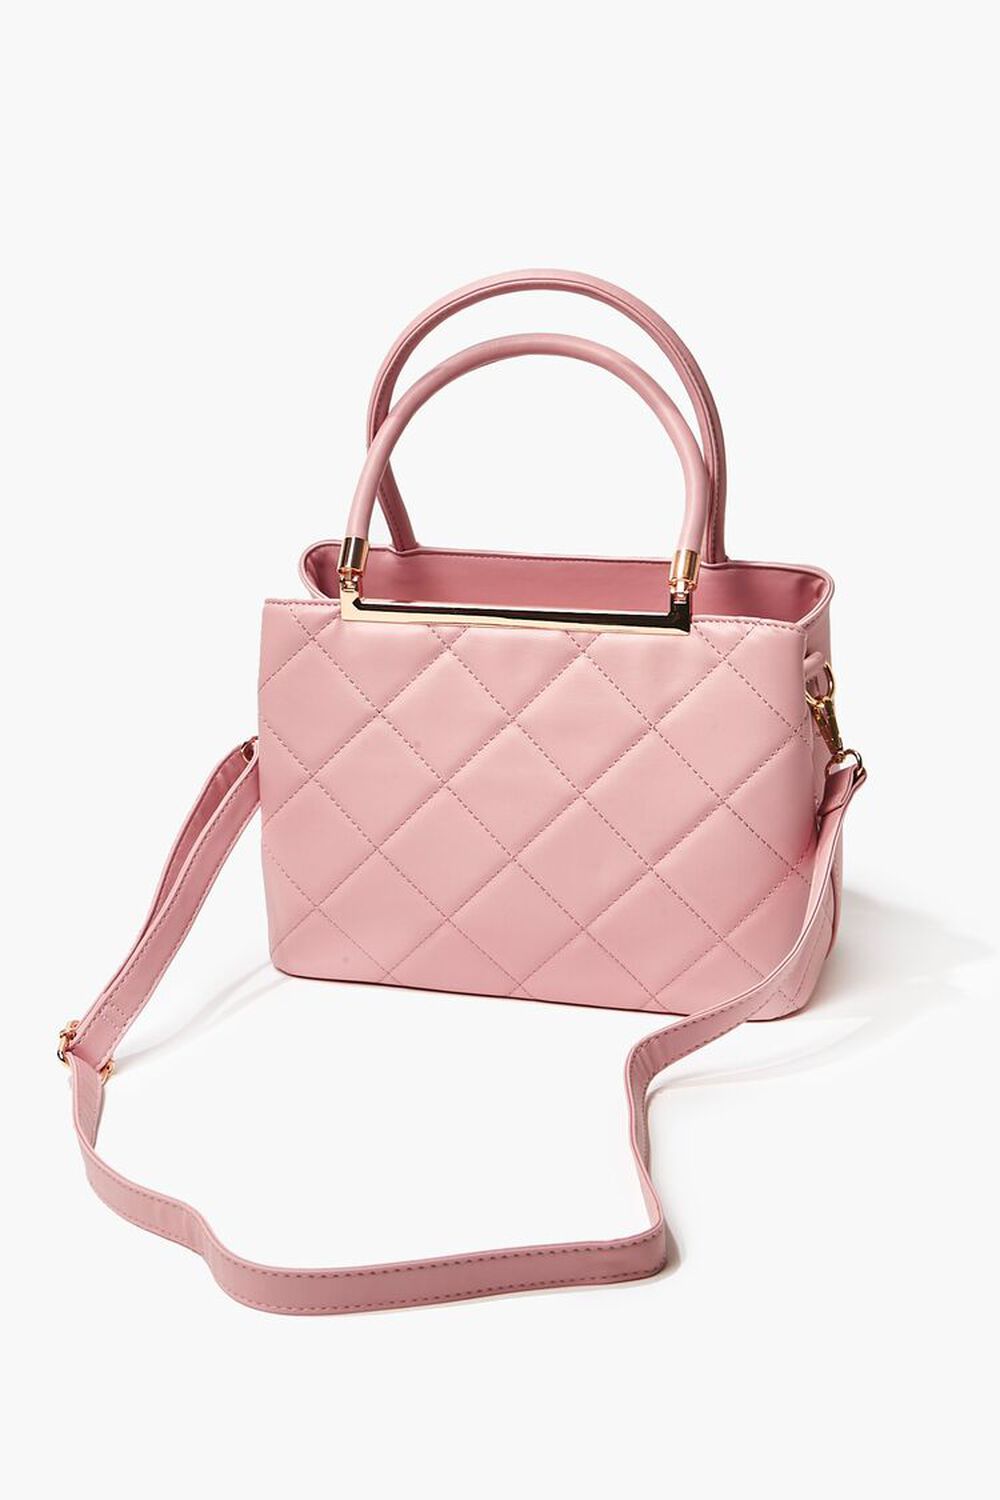 BLUSH Quilted Faux Leather Satchel, image 1